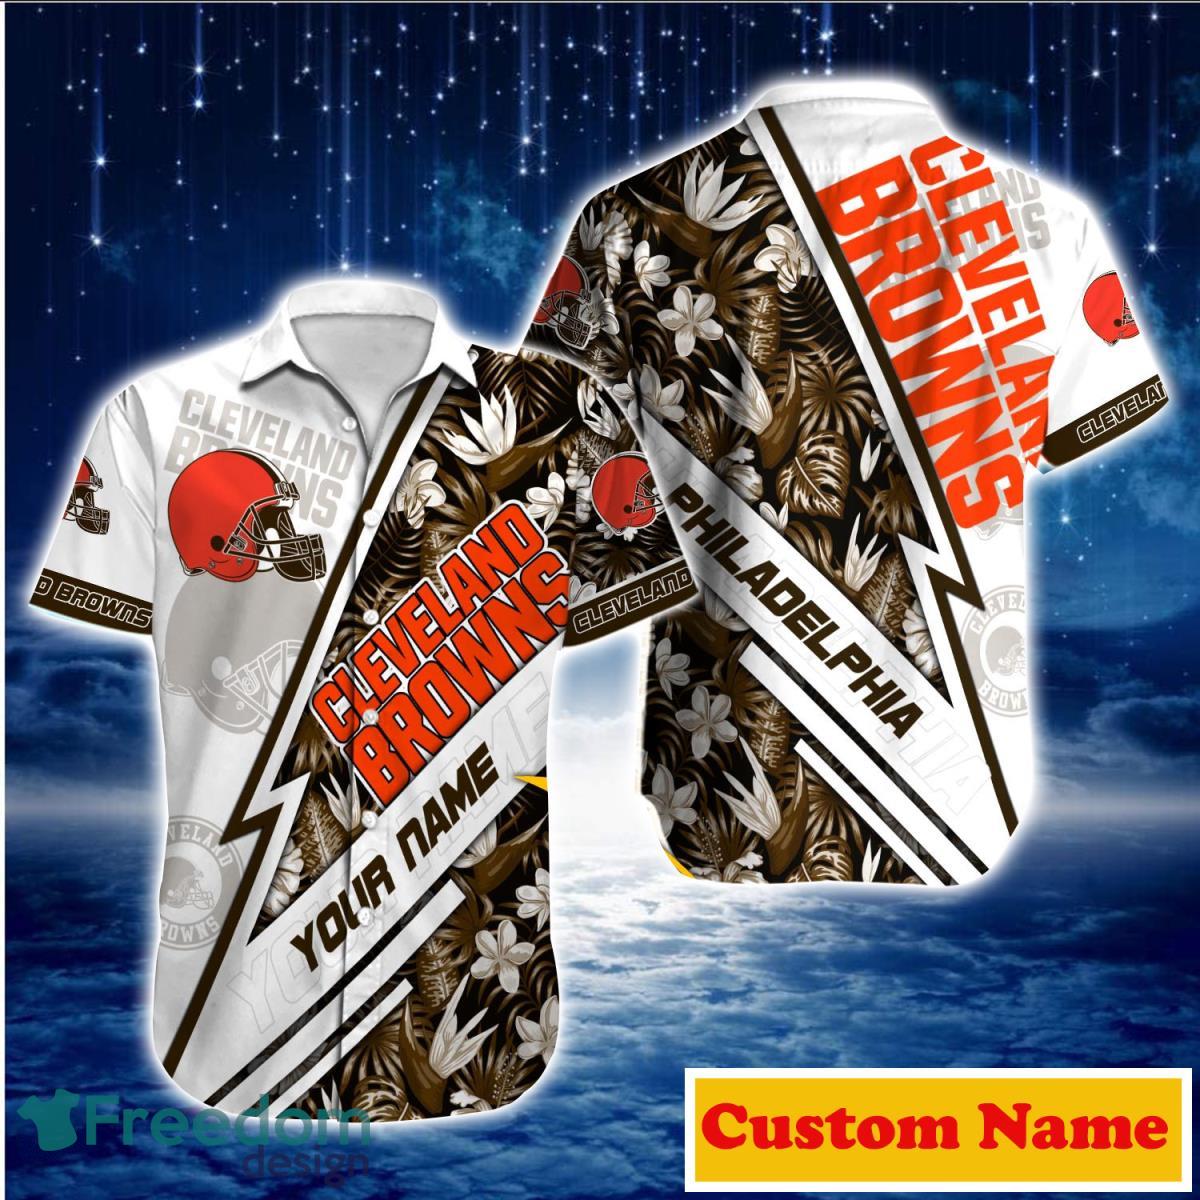 Cleveland Browns NFL Custom Name Hawaiian Shirt For Men And Women Special  Gift For True Fans - Freedomdesign